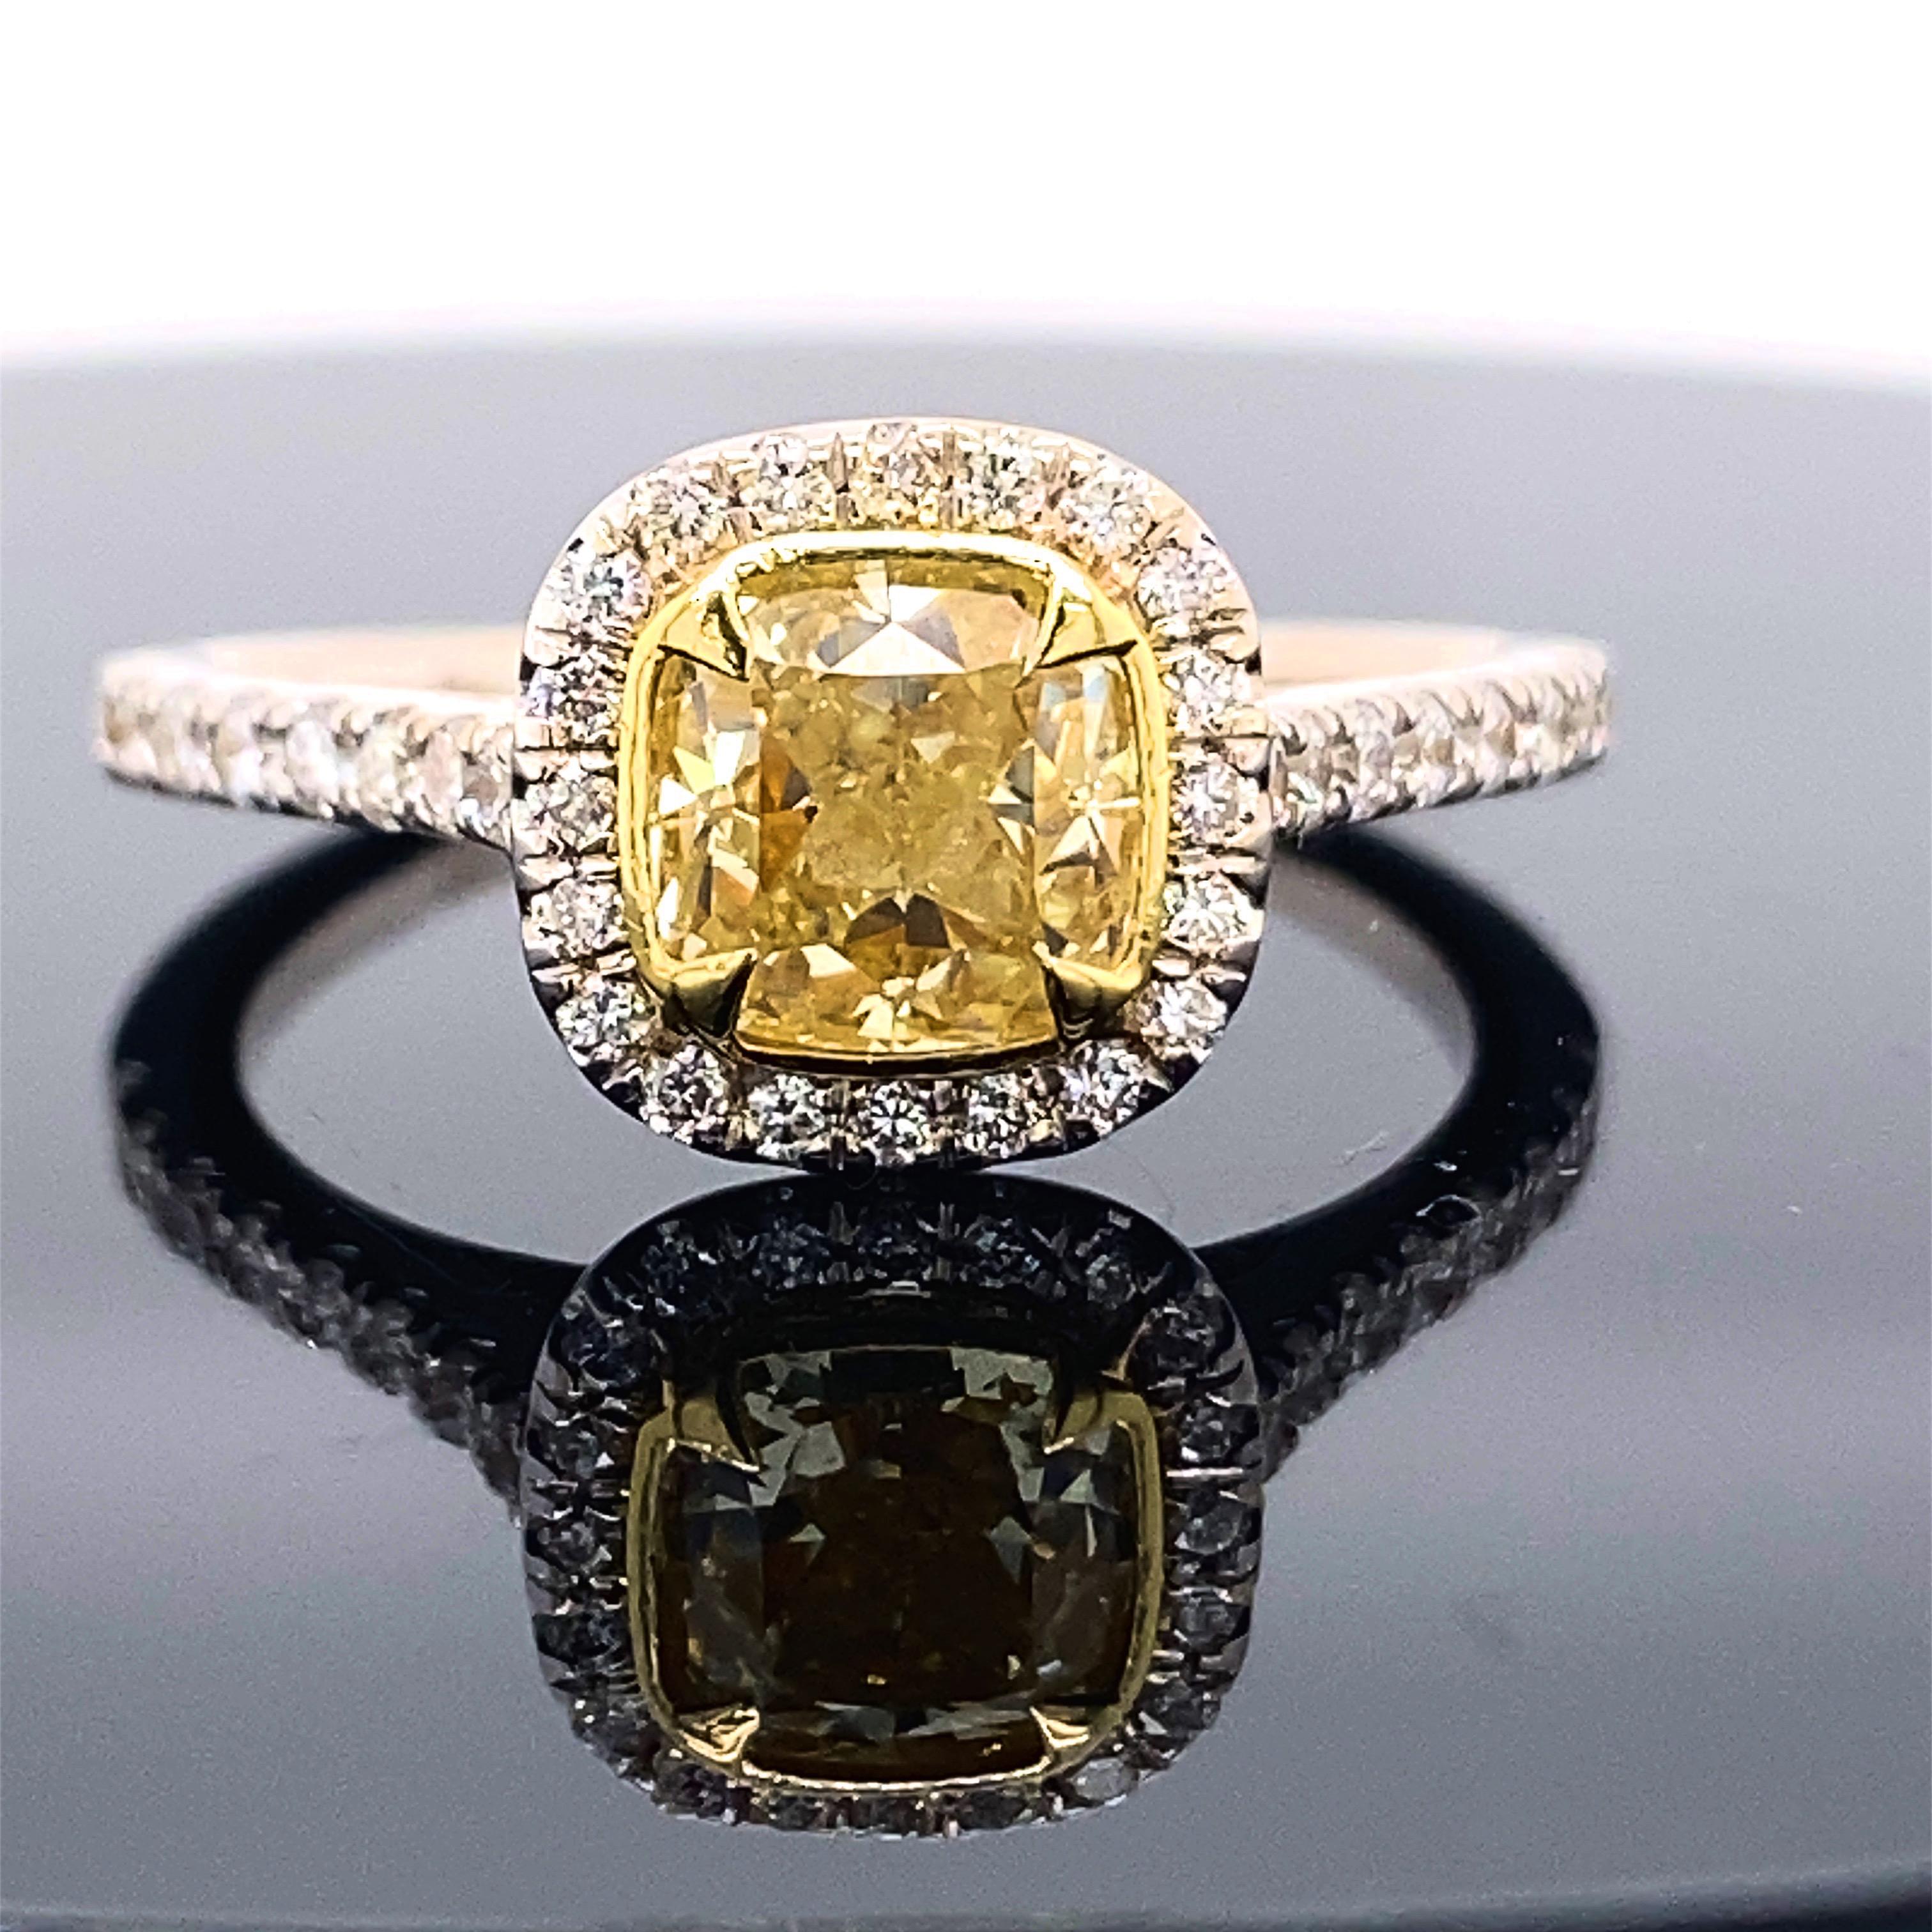 Fancy Yellow Cushion Diamond 1.37 Tcw Halo Design Engagement Ring 18kt WG and YG In Excellent Condition For Sale In San Diego, CA